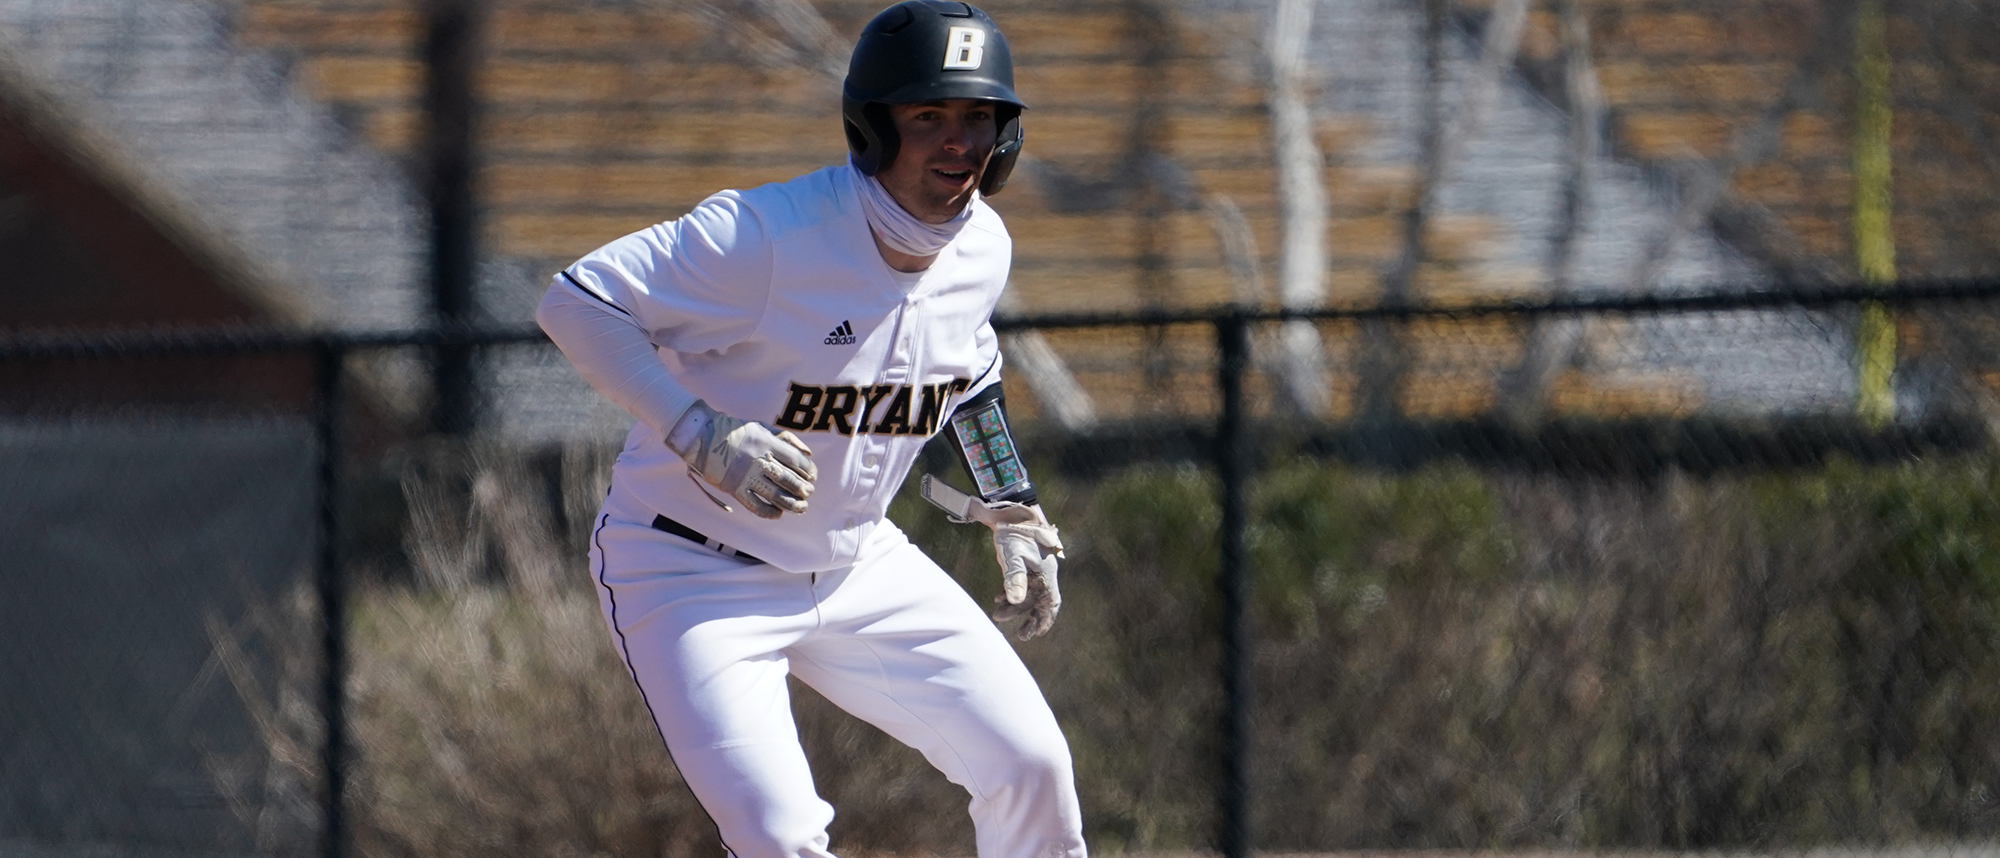 Bryant hosts Merrimack this weekend at Conaty Park